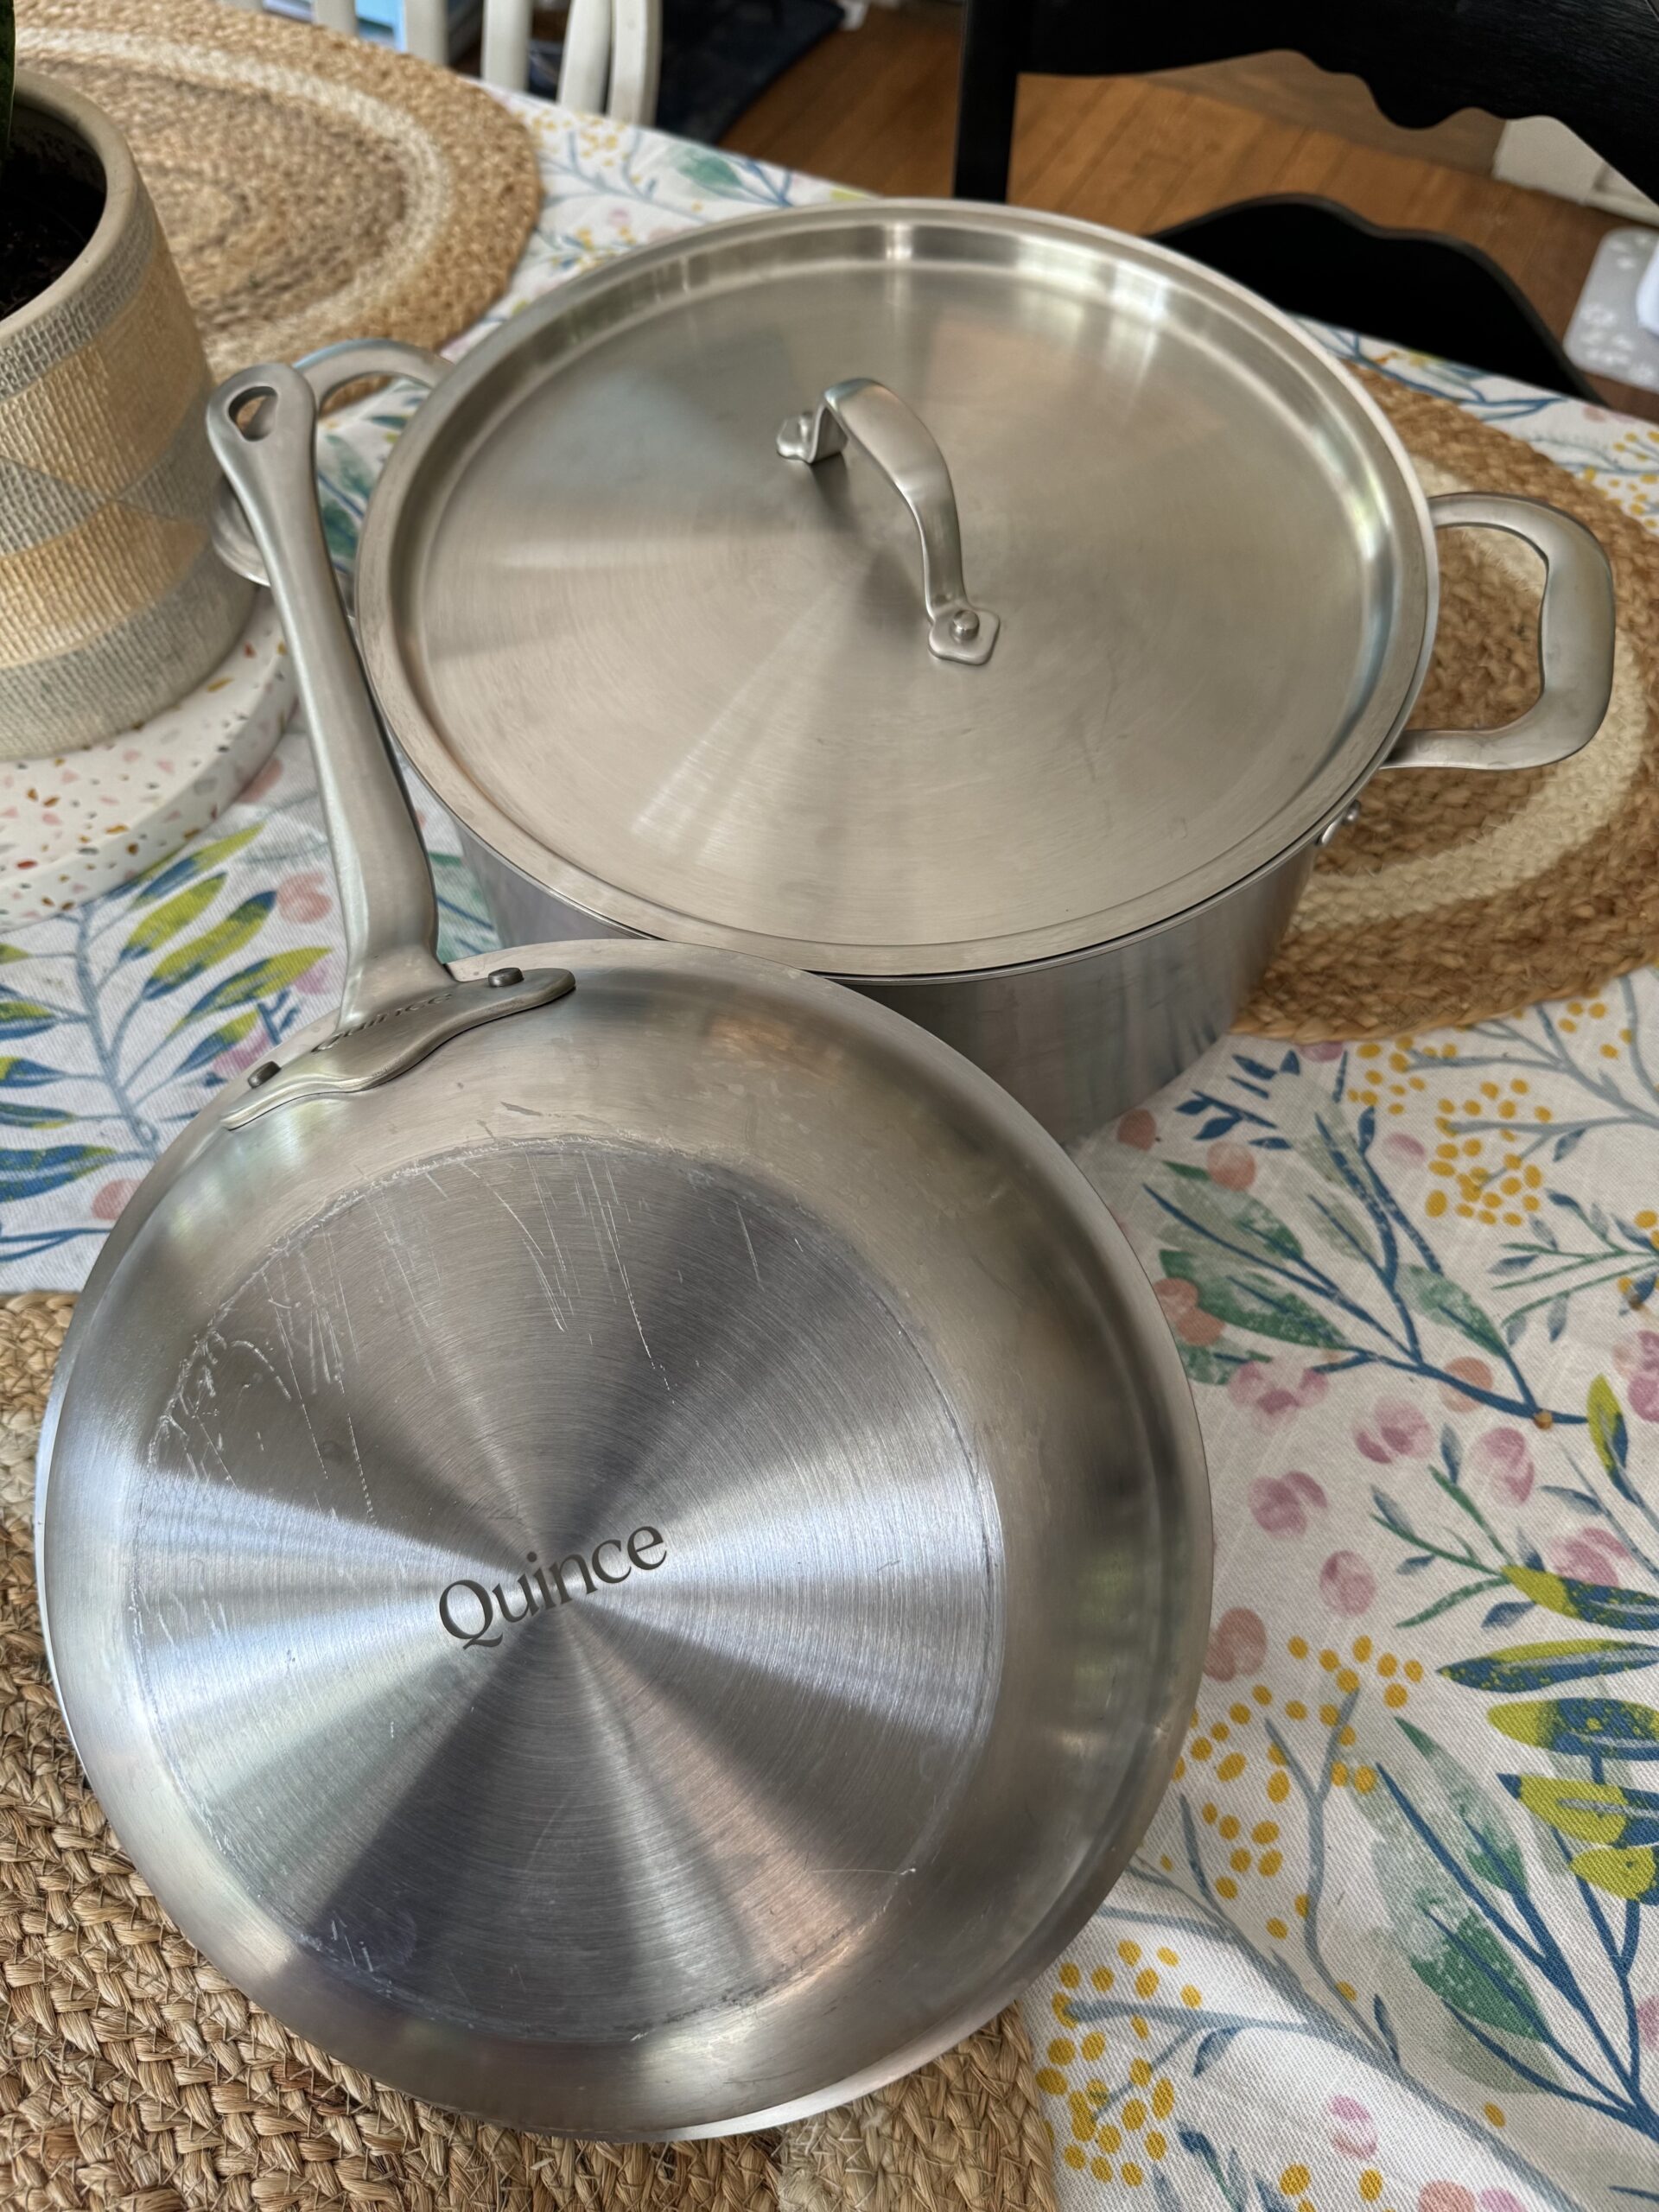 A stainless steel frying pan with "Quince" engraved on its base, placed next to a lidded stainless steel pot on a floral-patterned tablecloth.